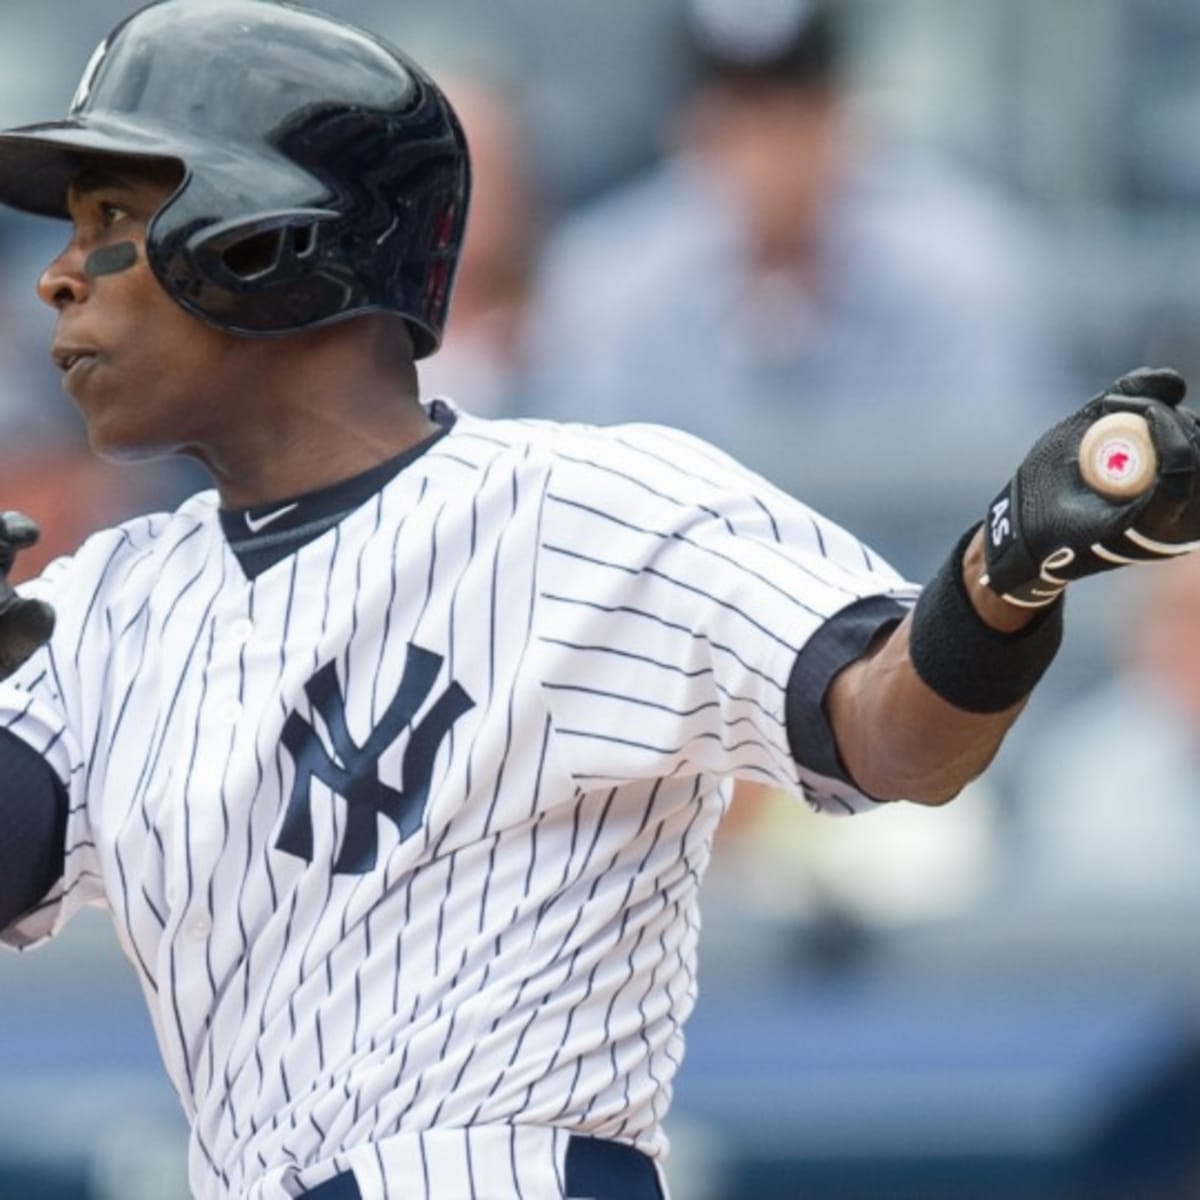 Alfonso Soriano announces his retirement from baseball after a 16